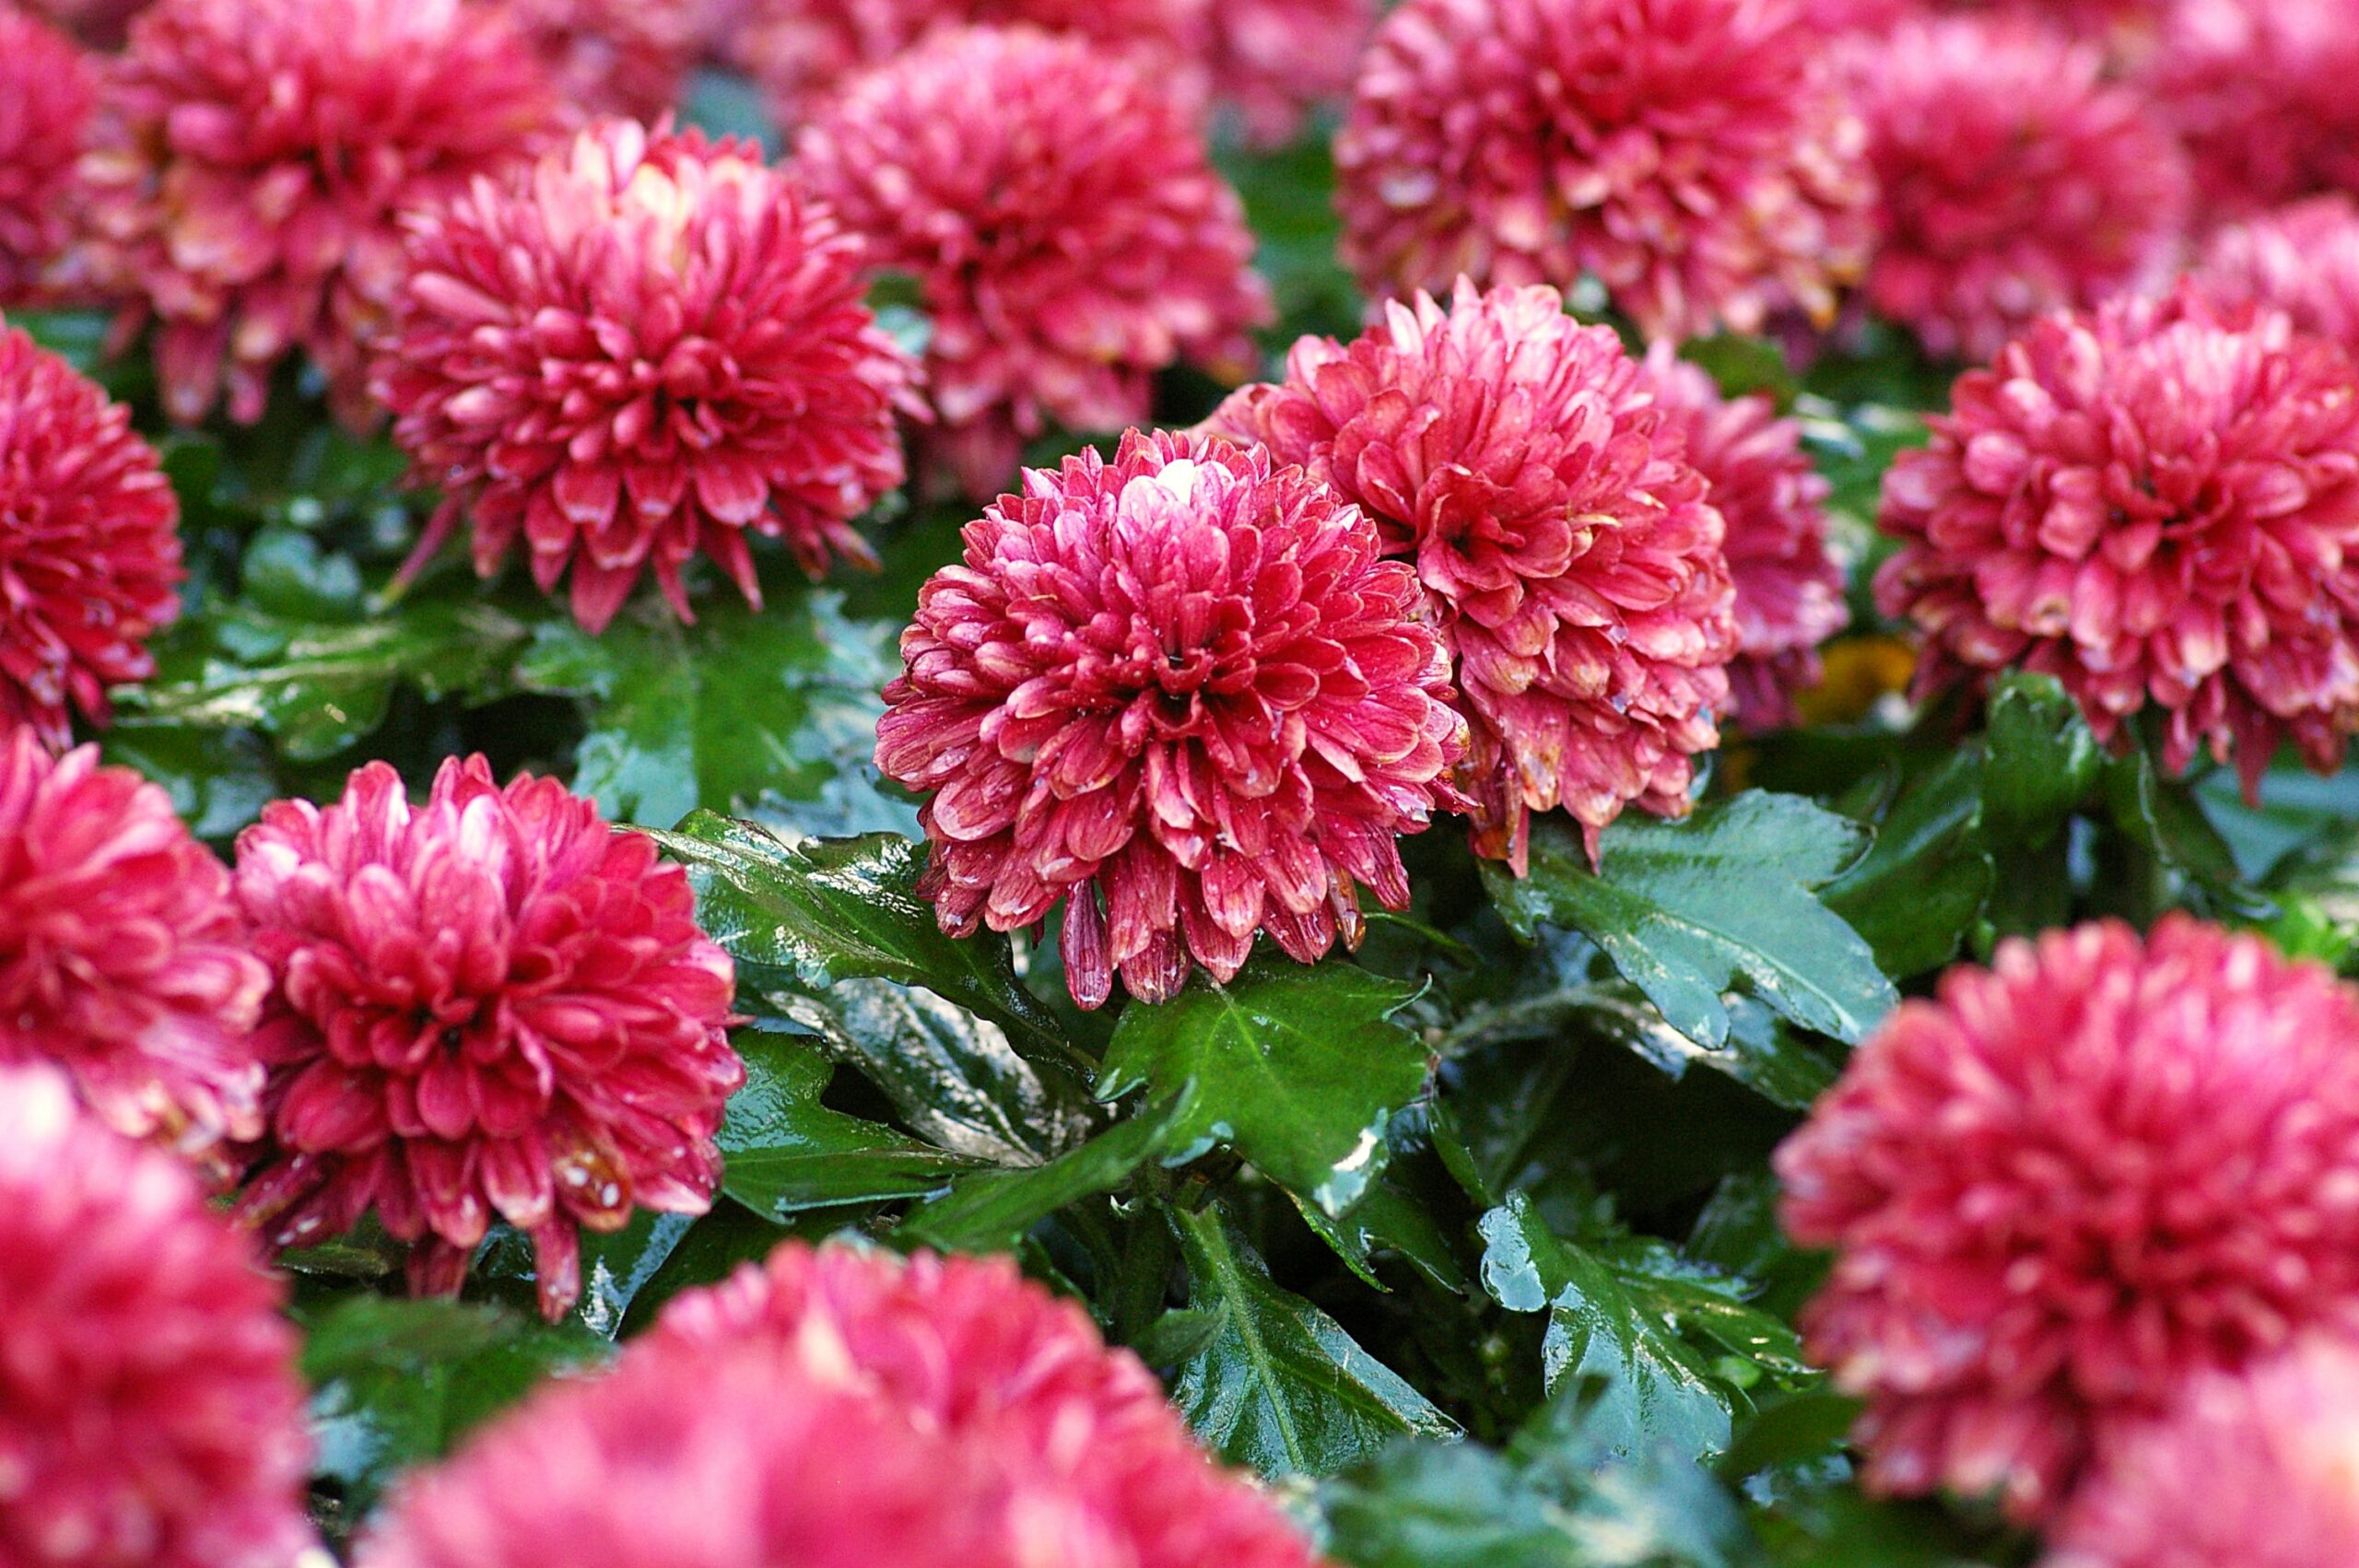 tD8iJWy1dJjq scaled 1 How To Plant, Grow And Care For Mums (Chrysanthemums) 1